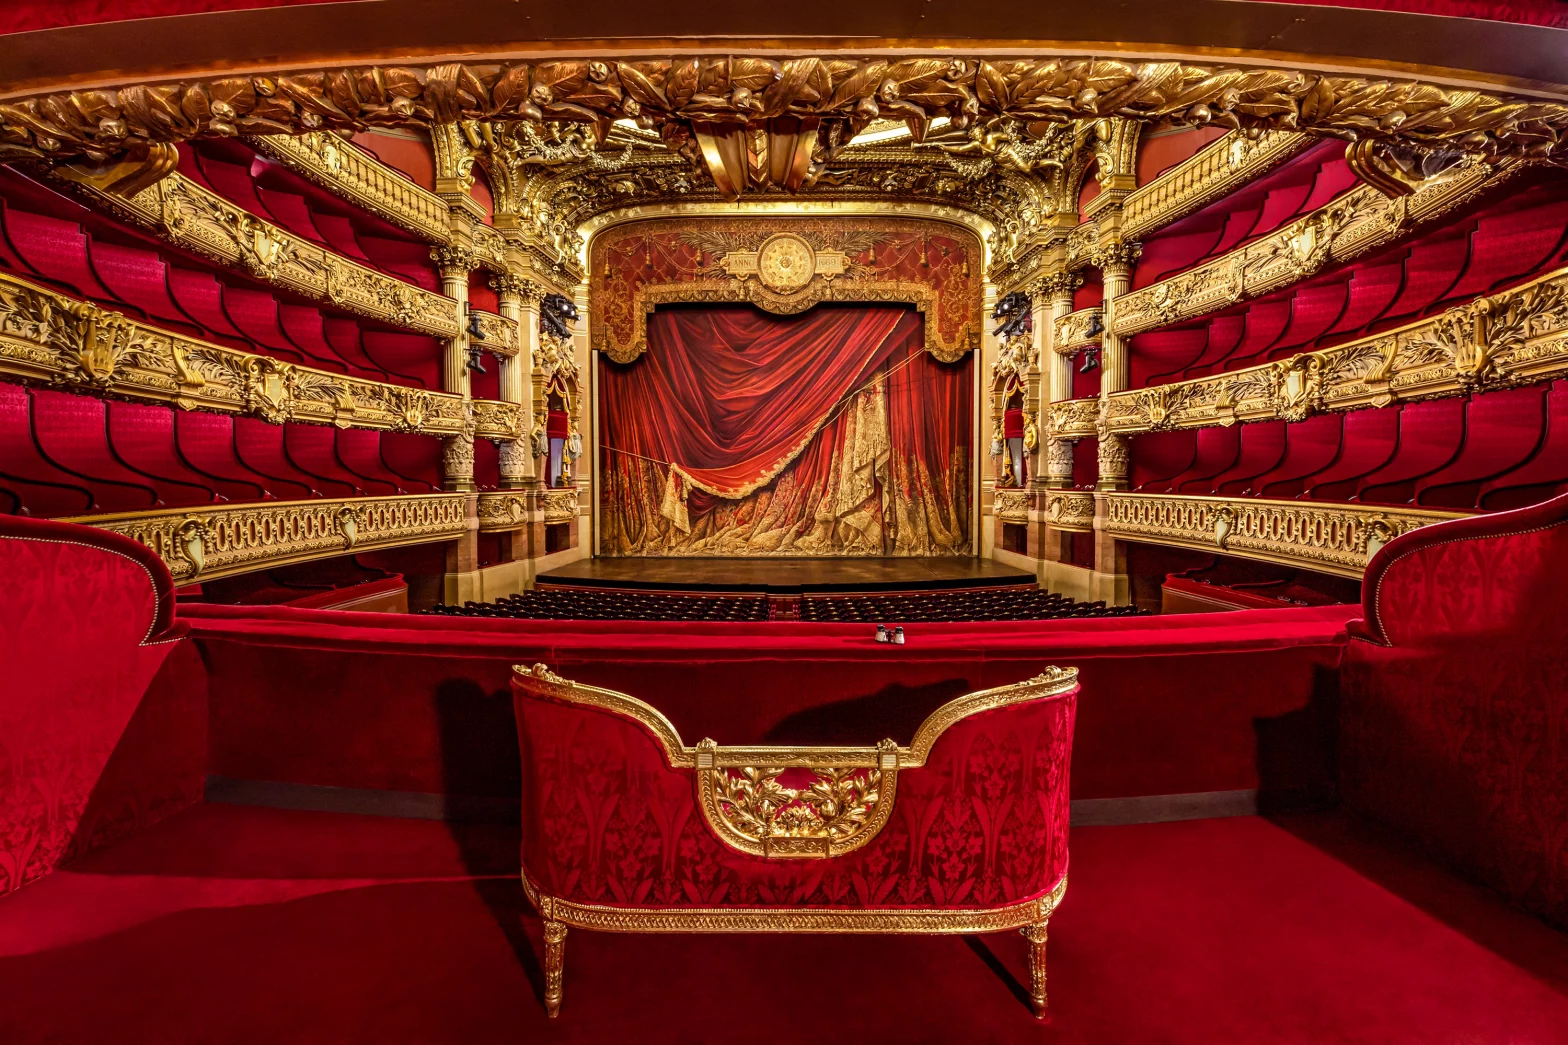 Airbnb Promotes “Phantom Of The Opera” Stay In Paris